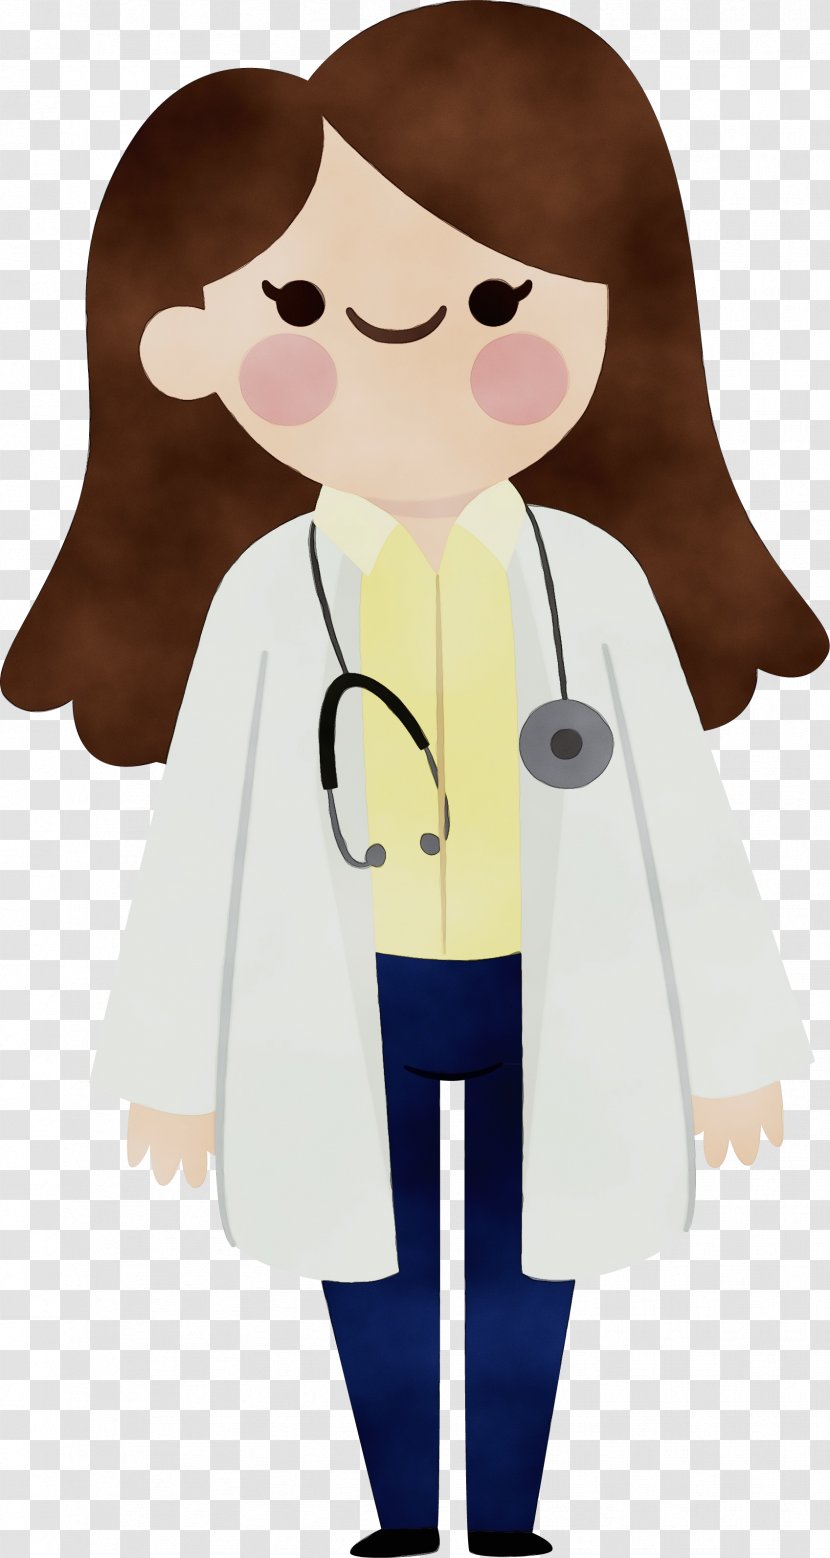 Doctor - Health Personnel - Fictional Character Animation Transparent PNG